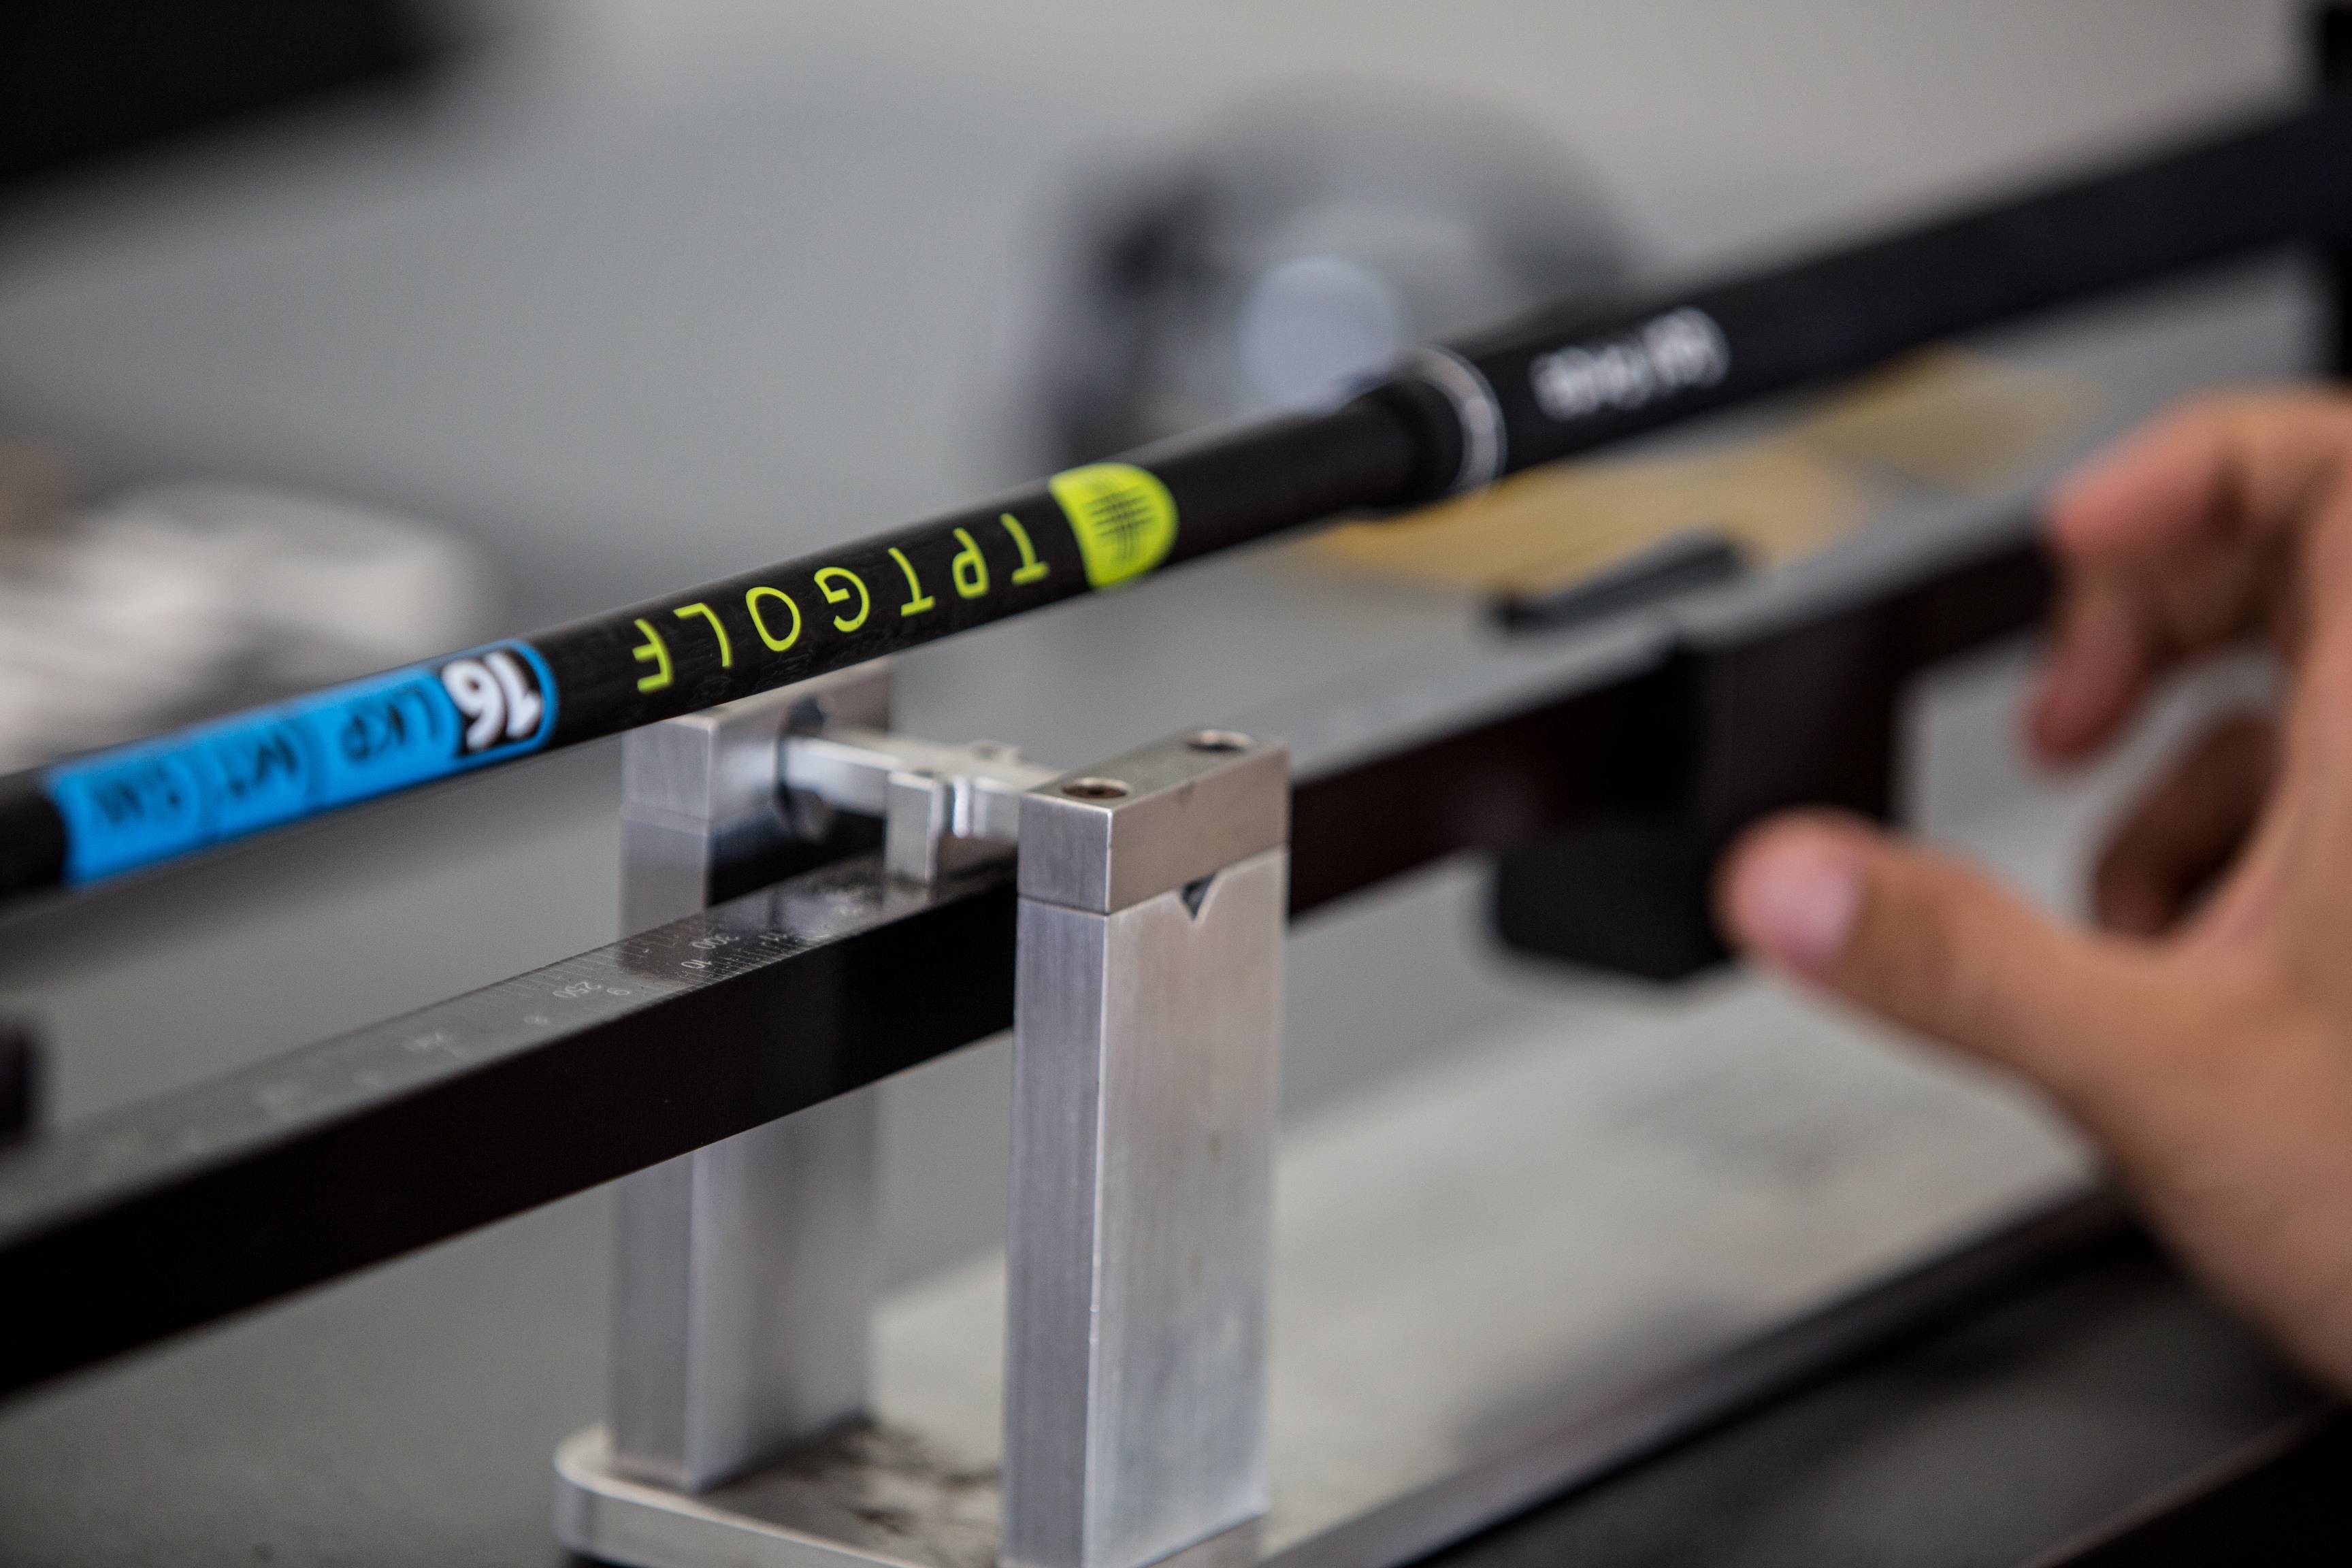 The automated tube manufacturing process can produce concentric carbon golf shafts which were recently launched under the brand name TPT Golf.